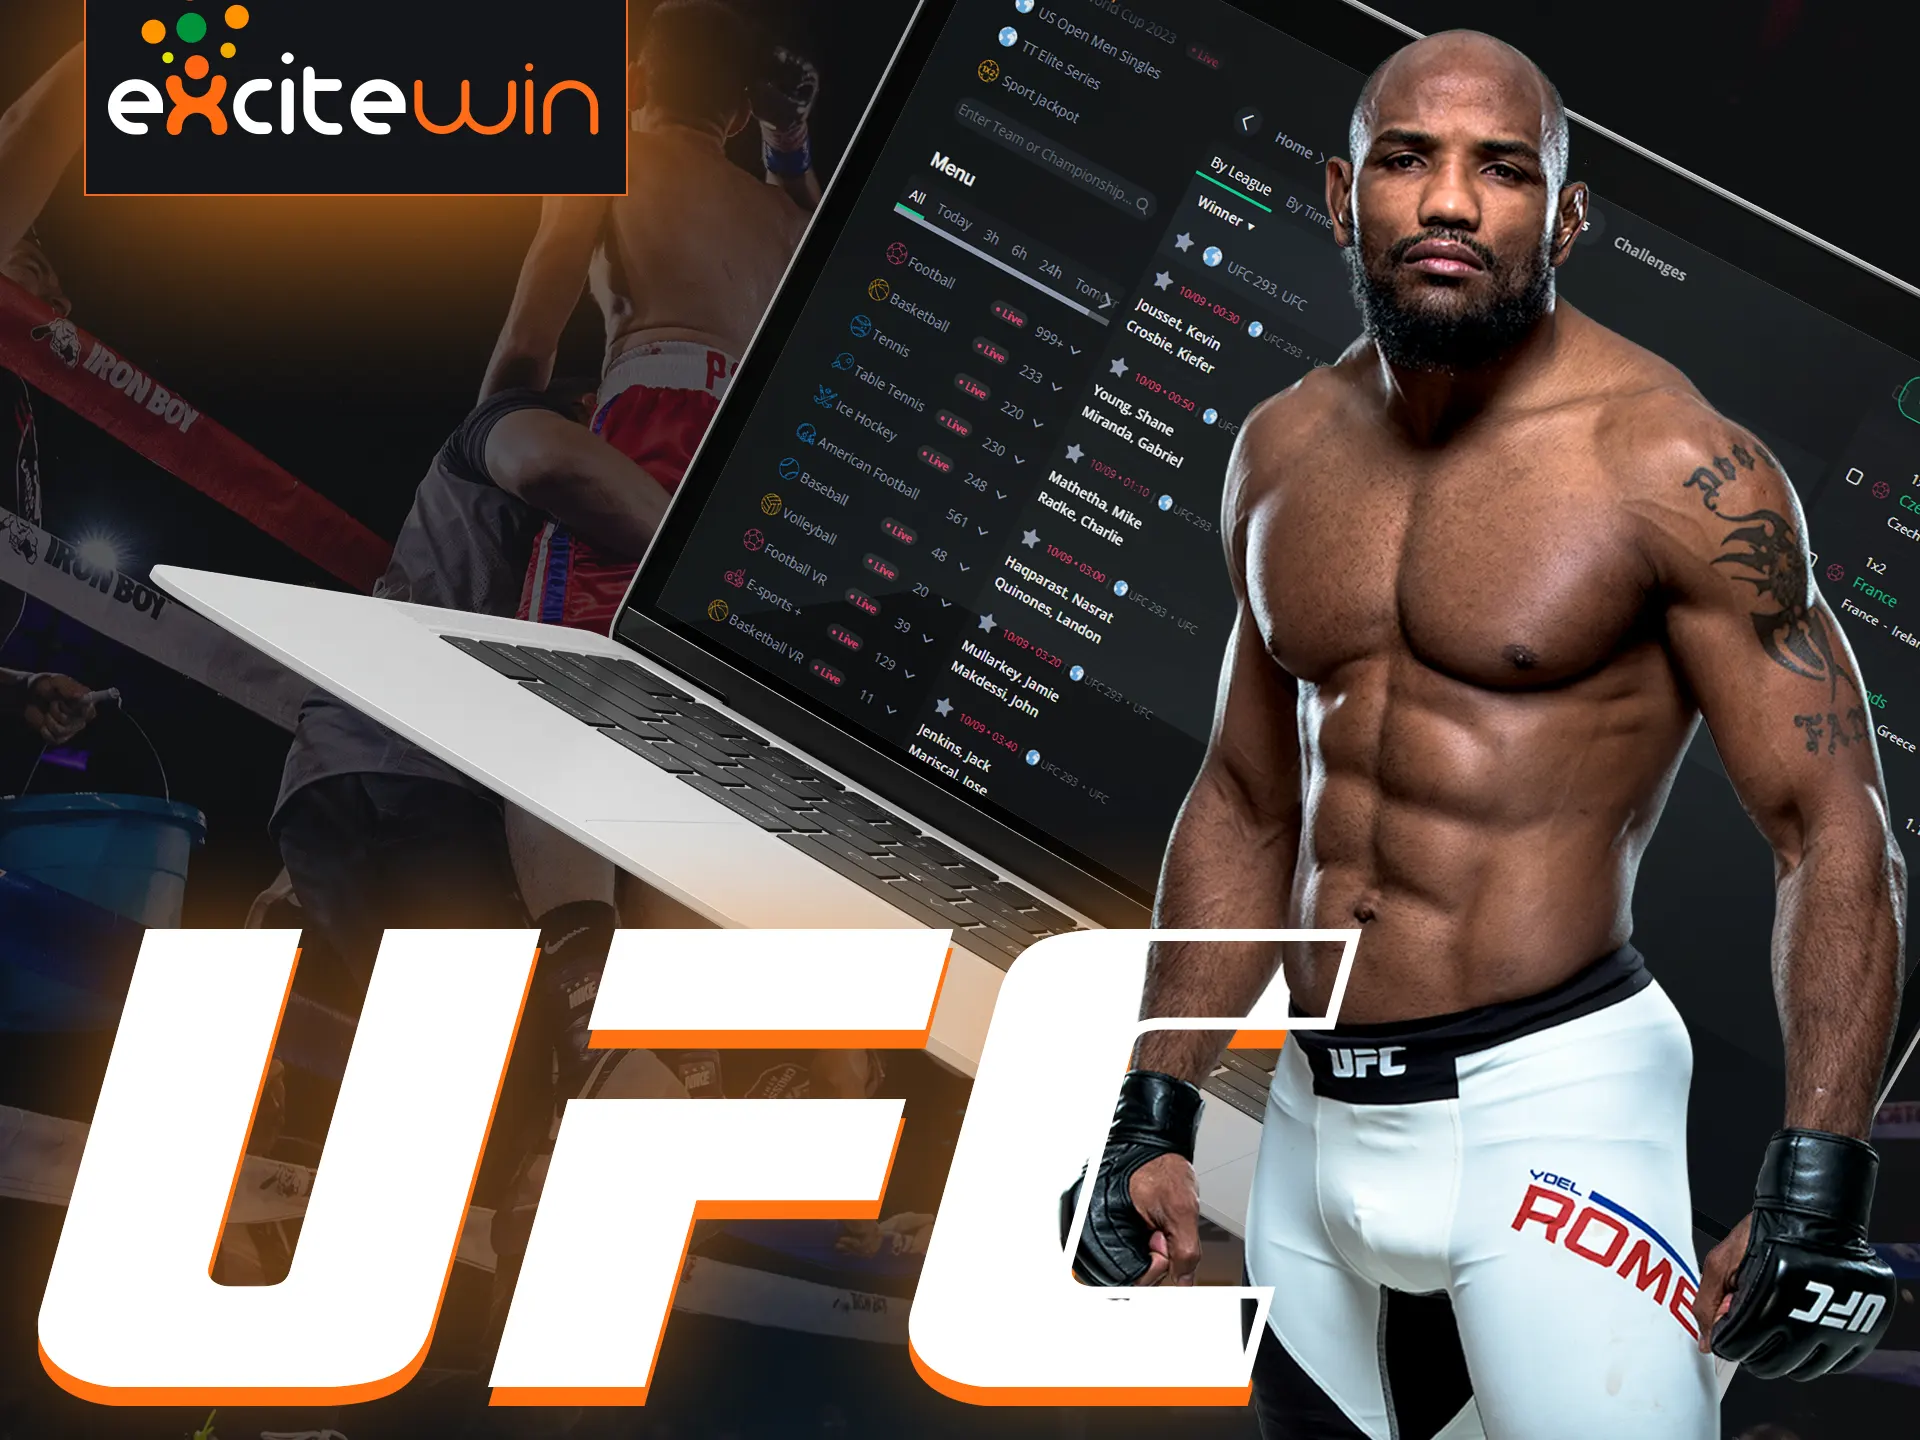 Place your bets on UFC Excitewin.